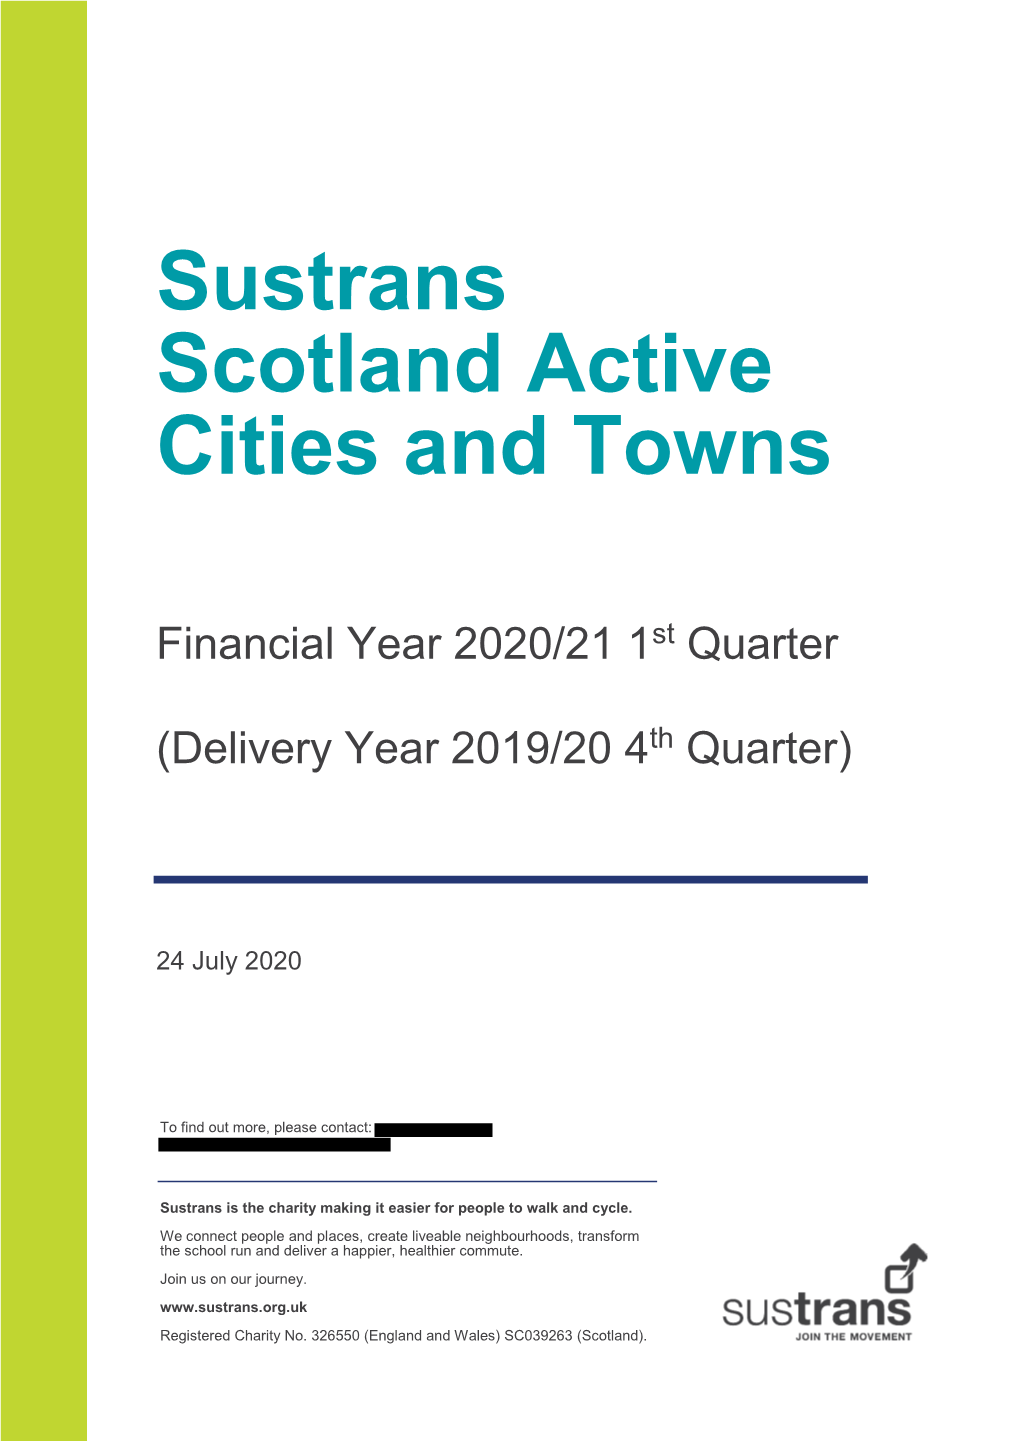 Sustrans Scotland Active Cities and Towns